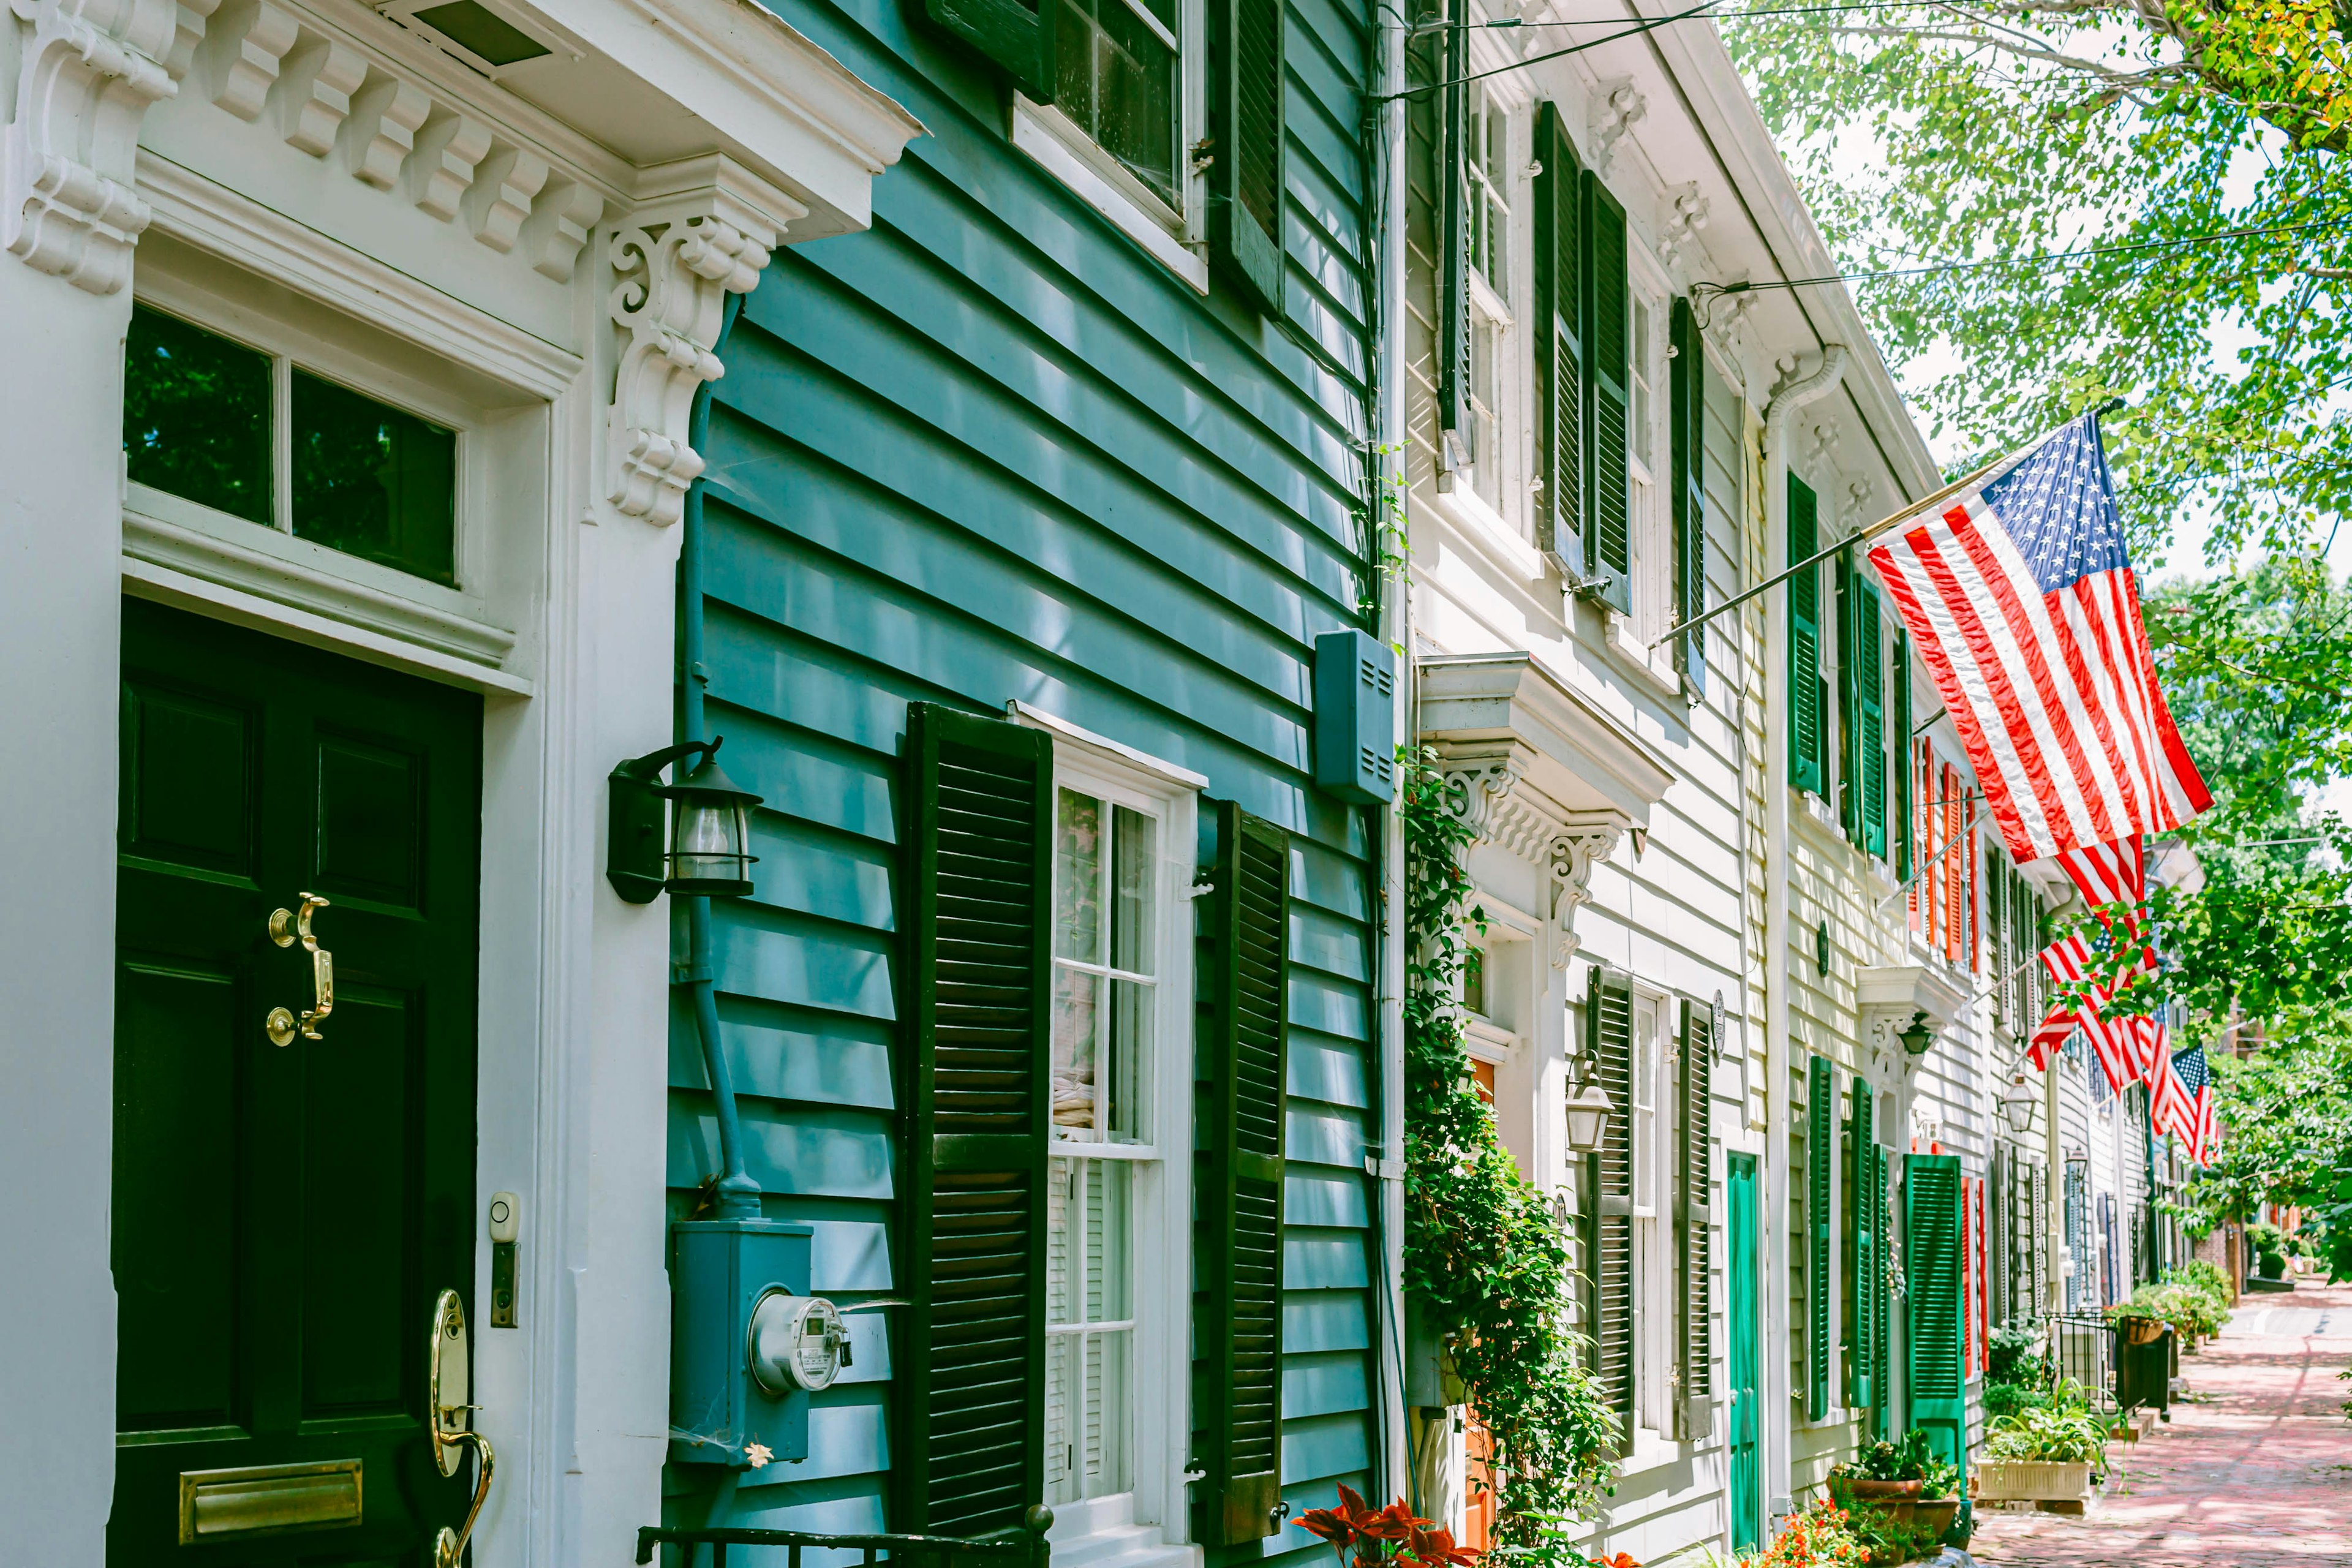 Townhouses on residential street in Old Town Alexandria, Virginia